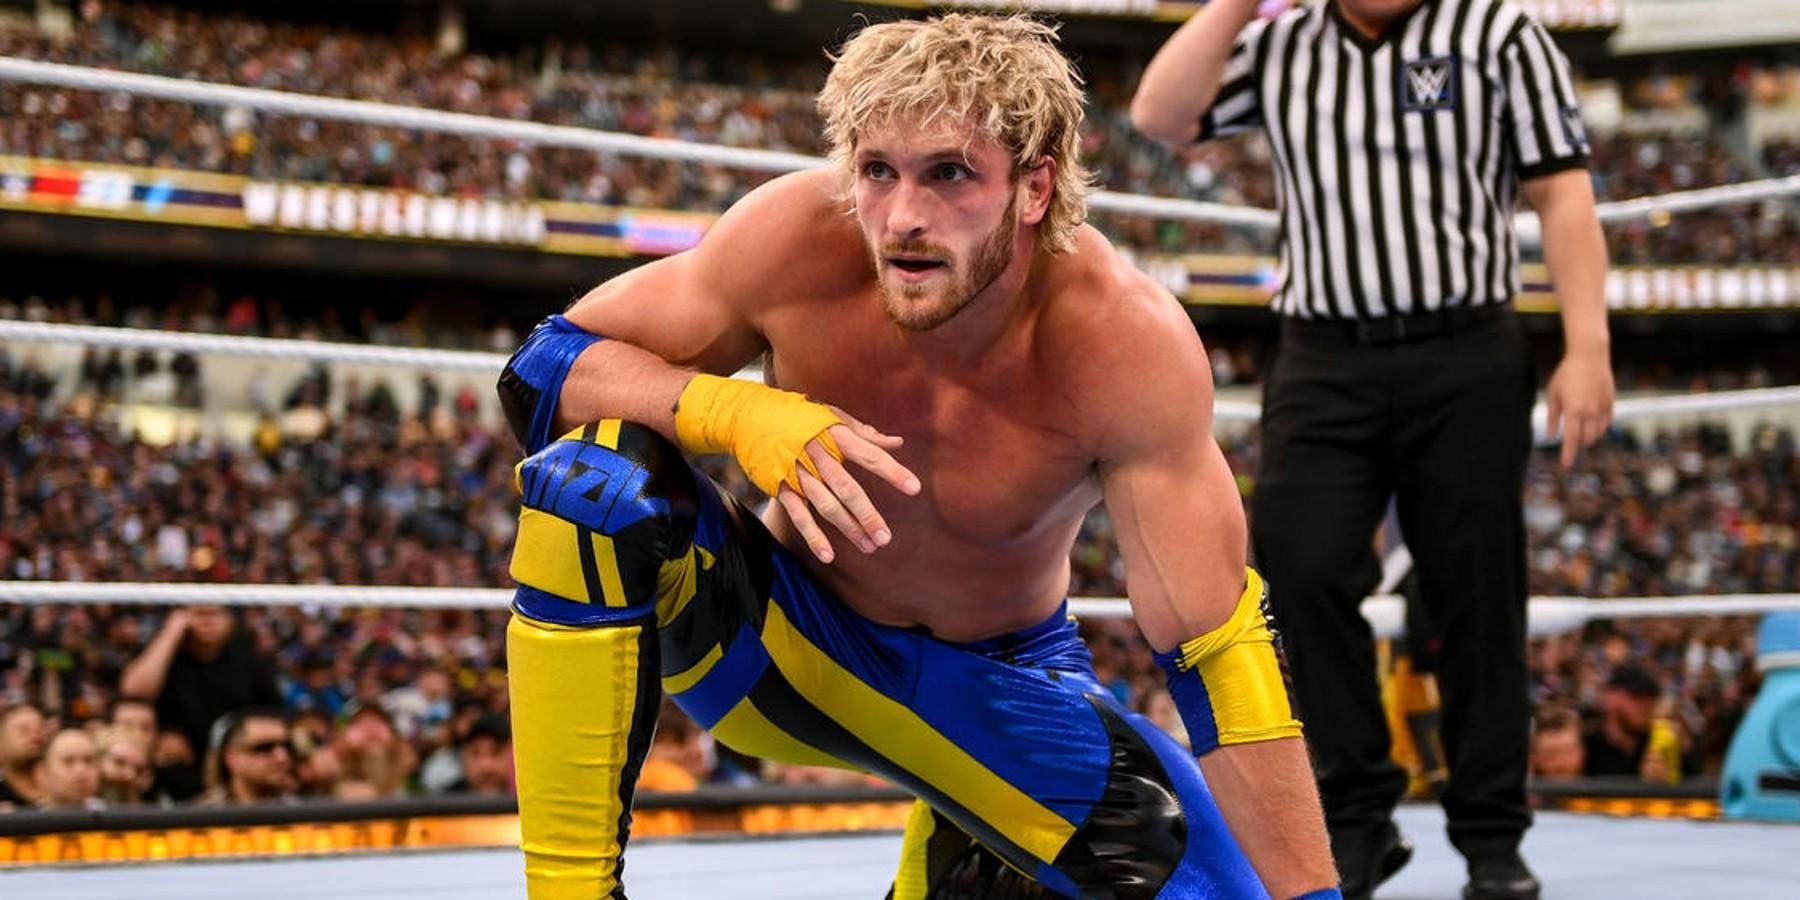 A screenshot of Logan Paul crouching in the ring at a WWE event.